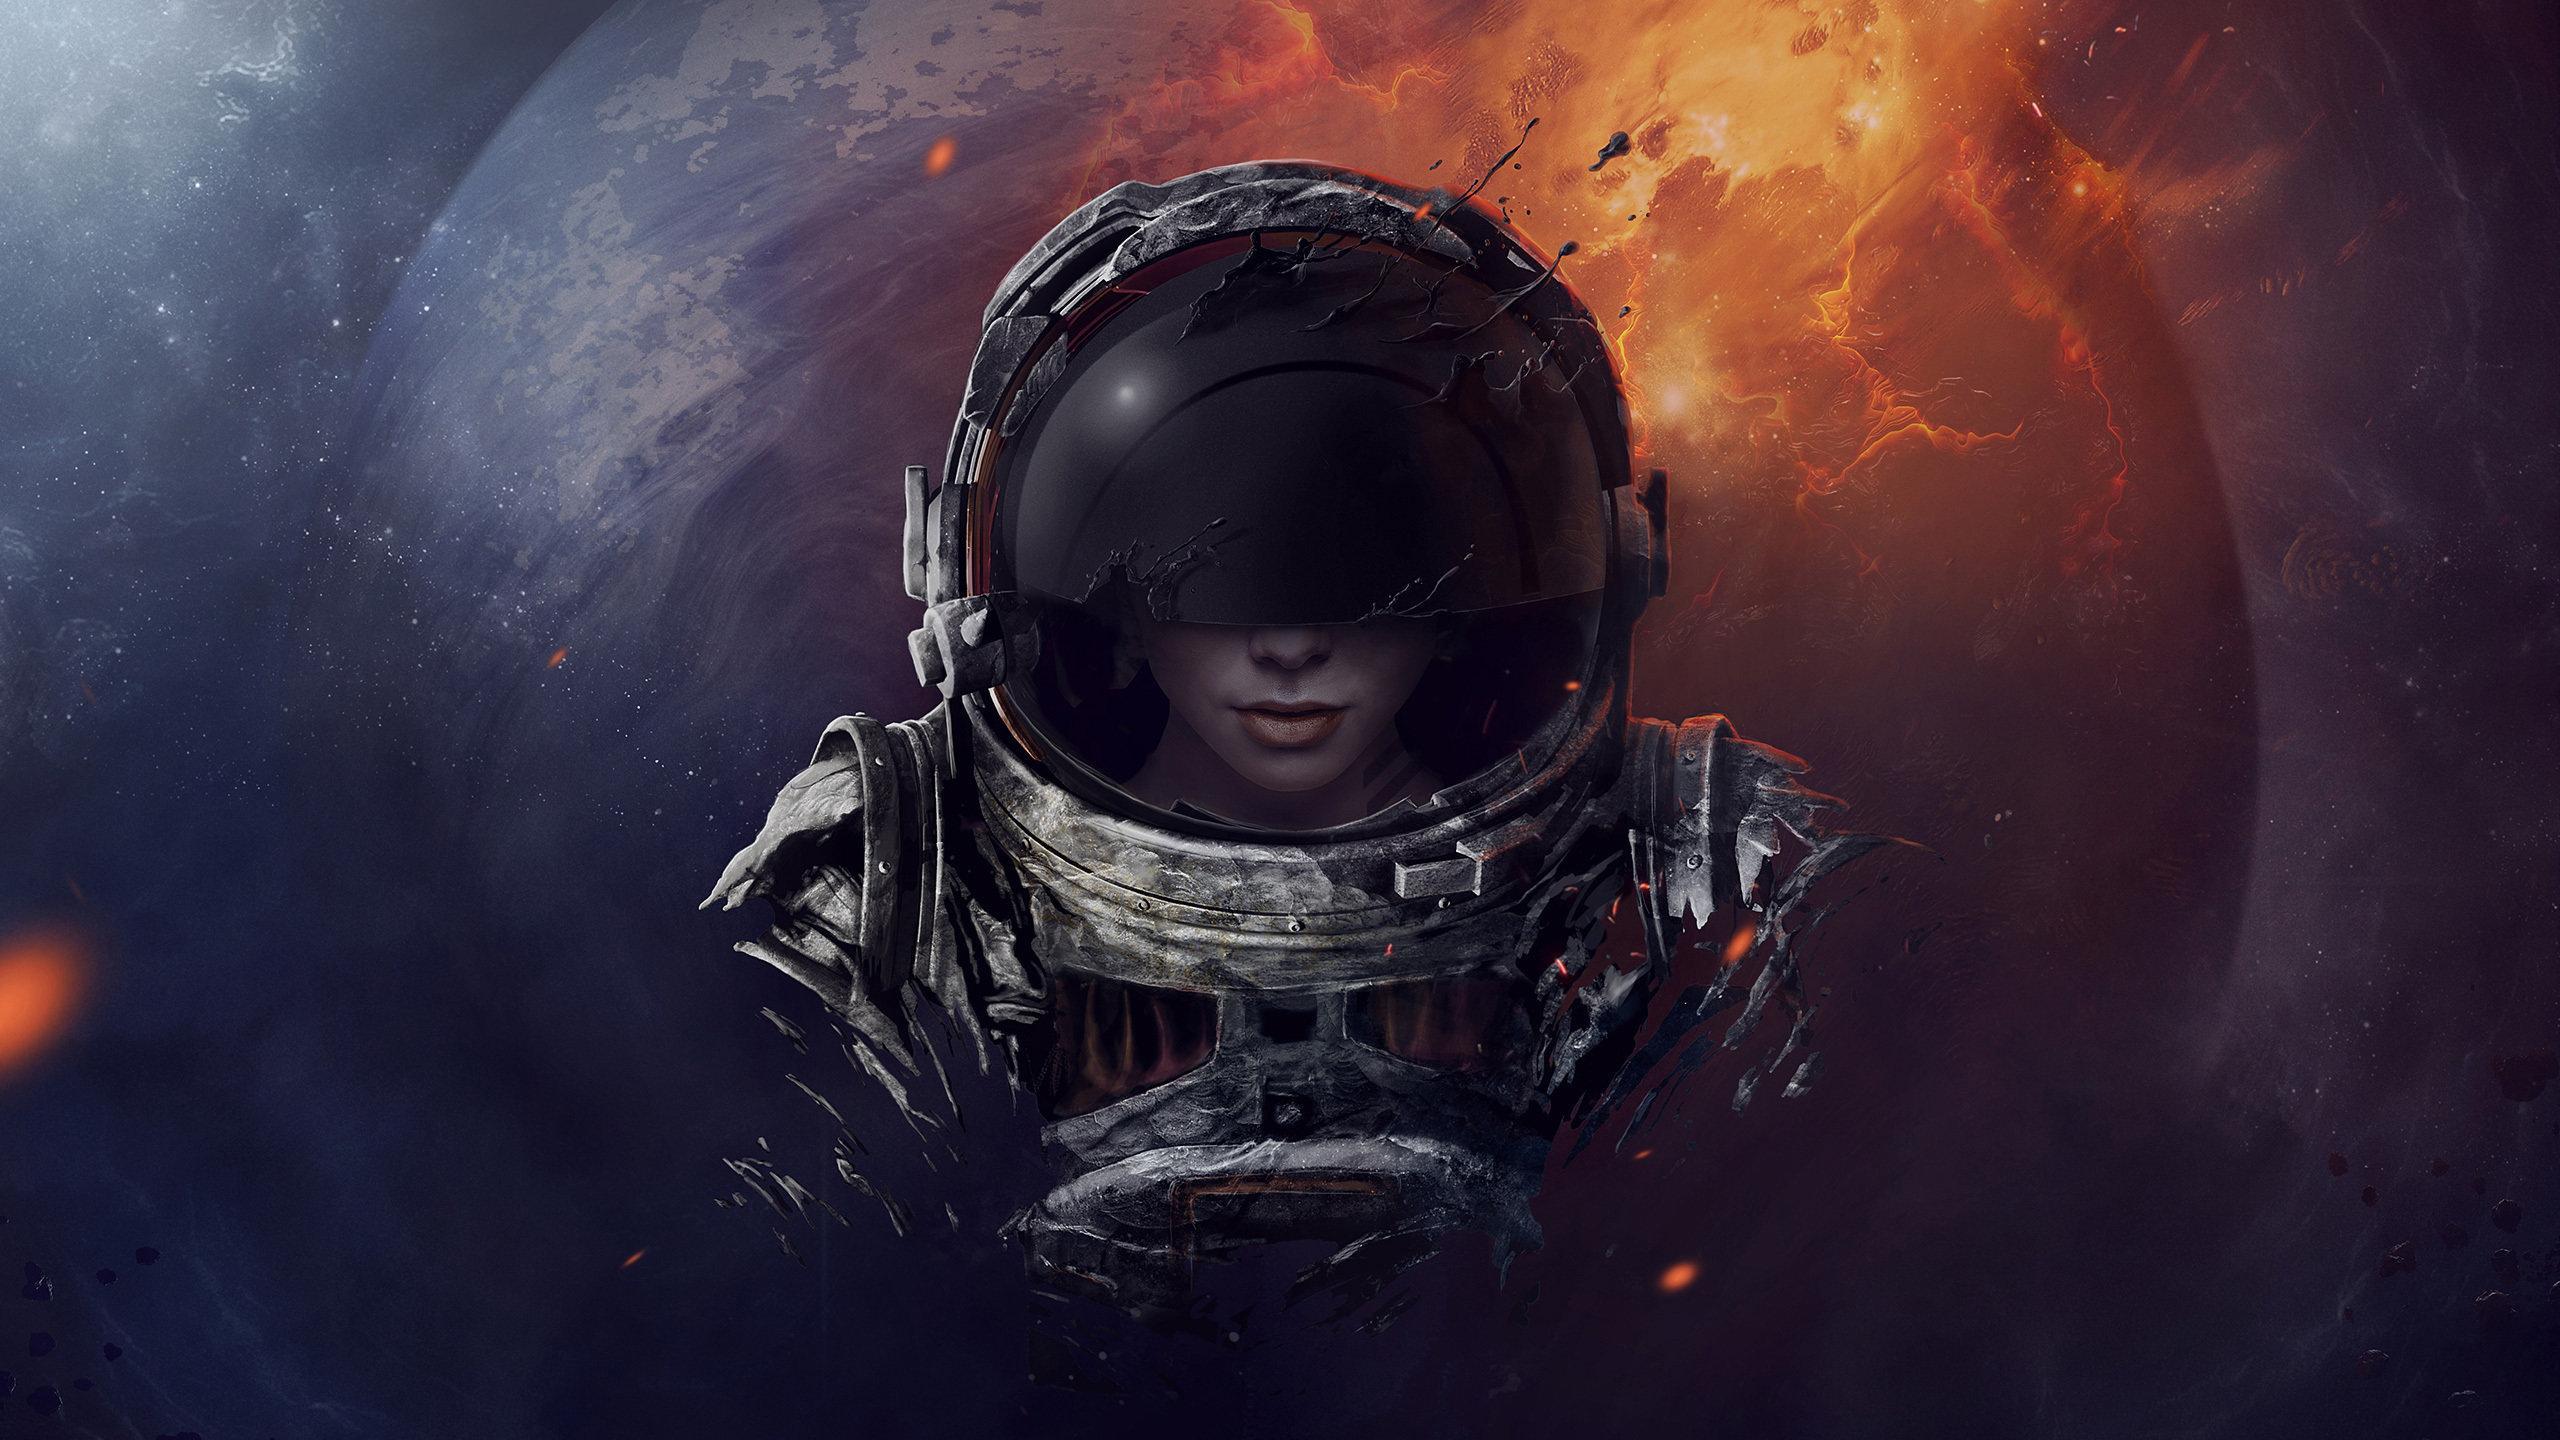 Astronaut 1125x2436 Resolution Wallpapers Iphone XSIphone 10Iphone X